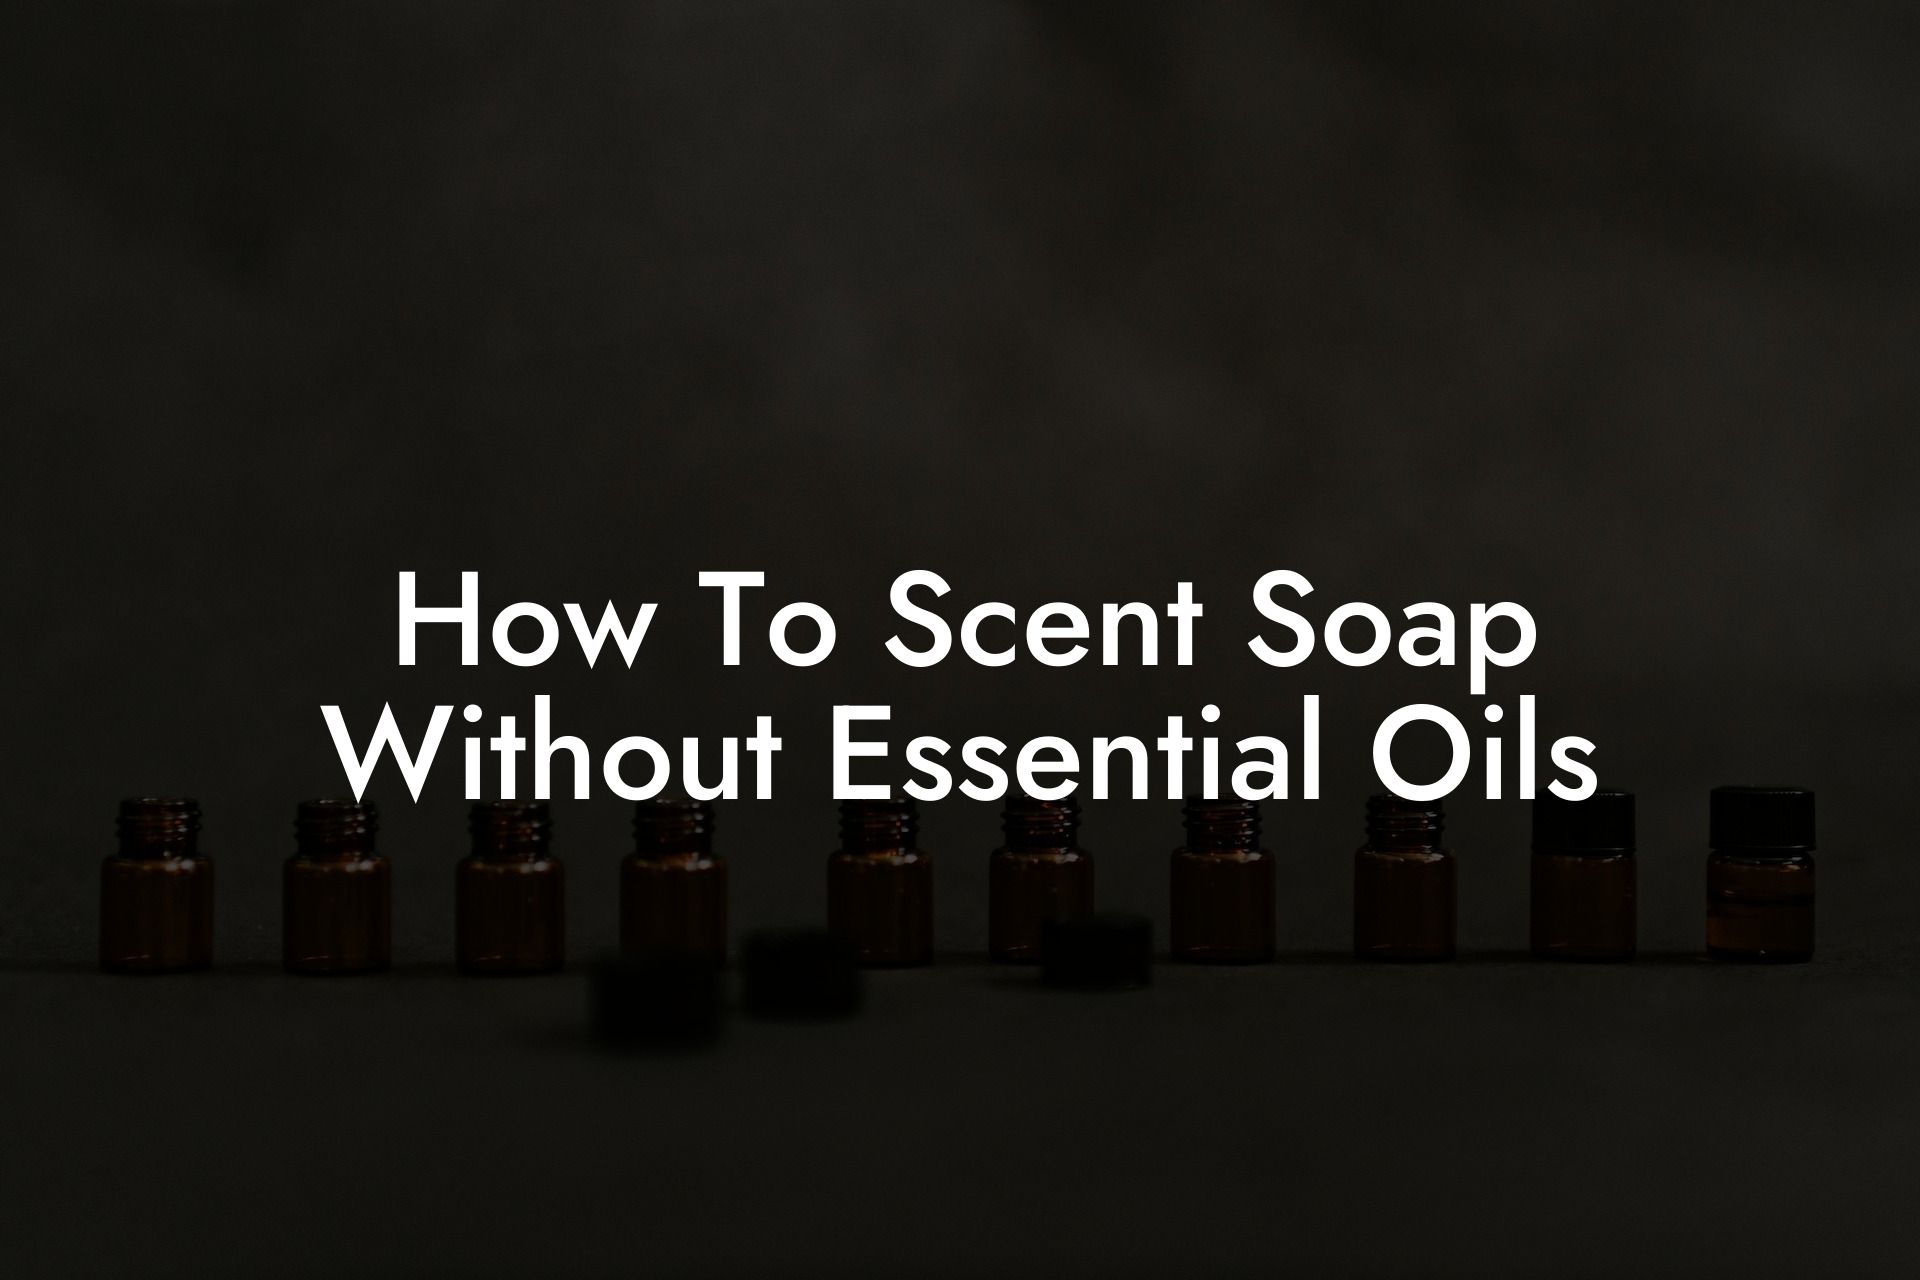 How To Scent Soap Without Essential Oils